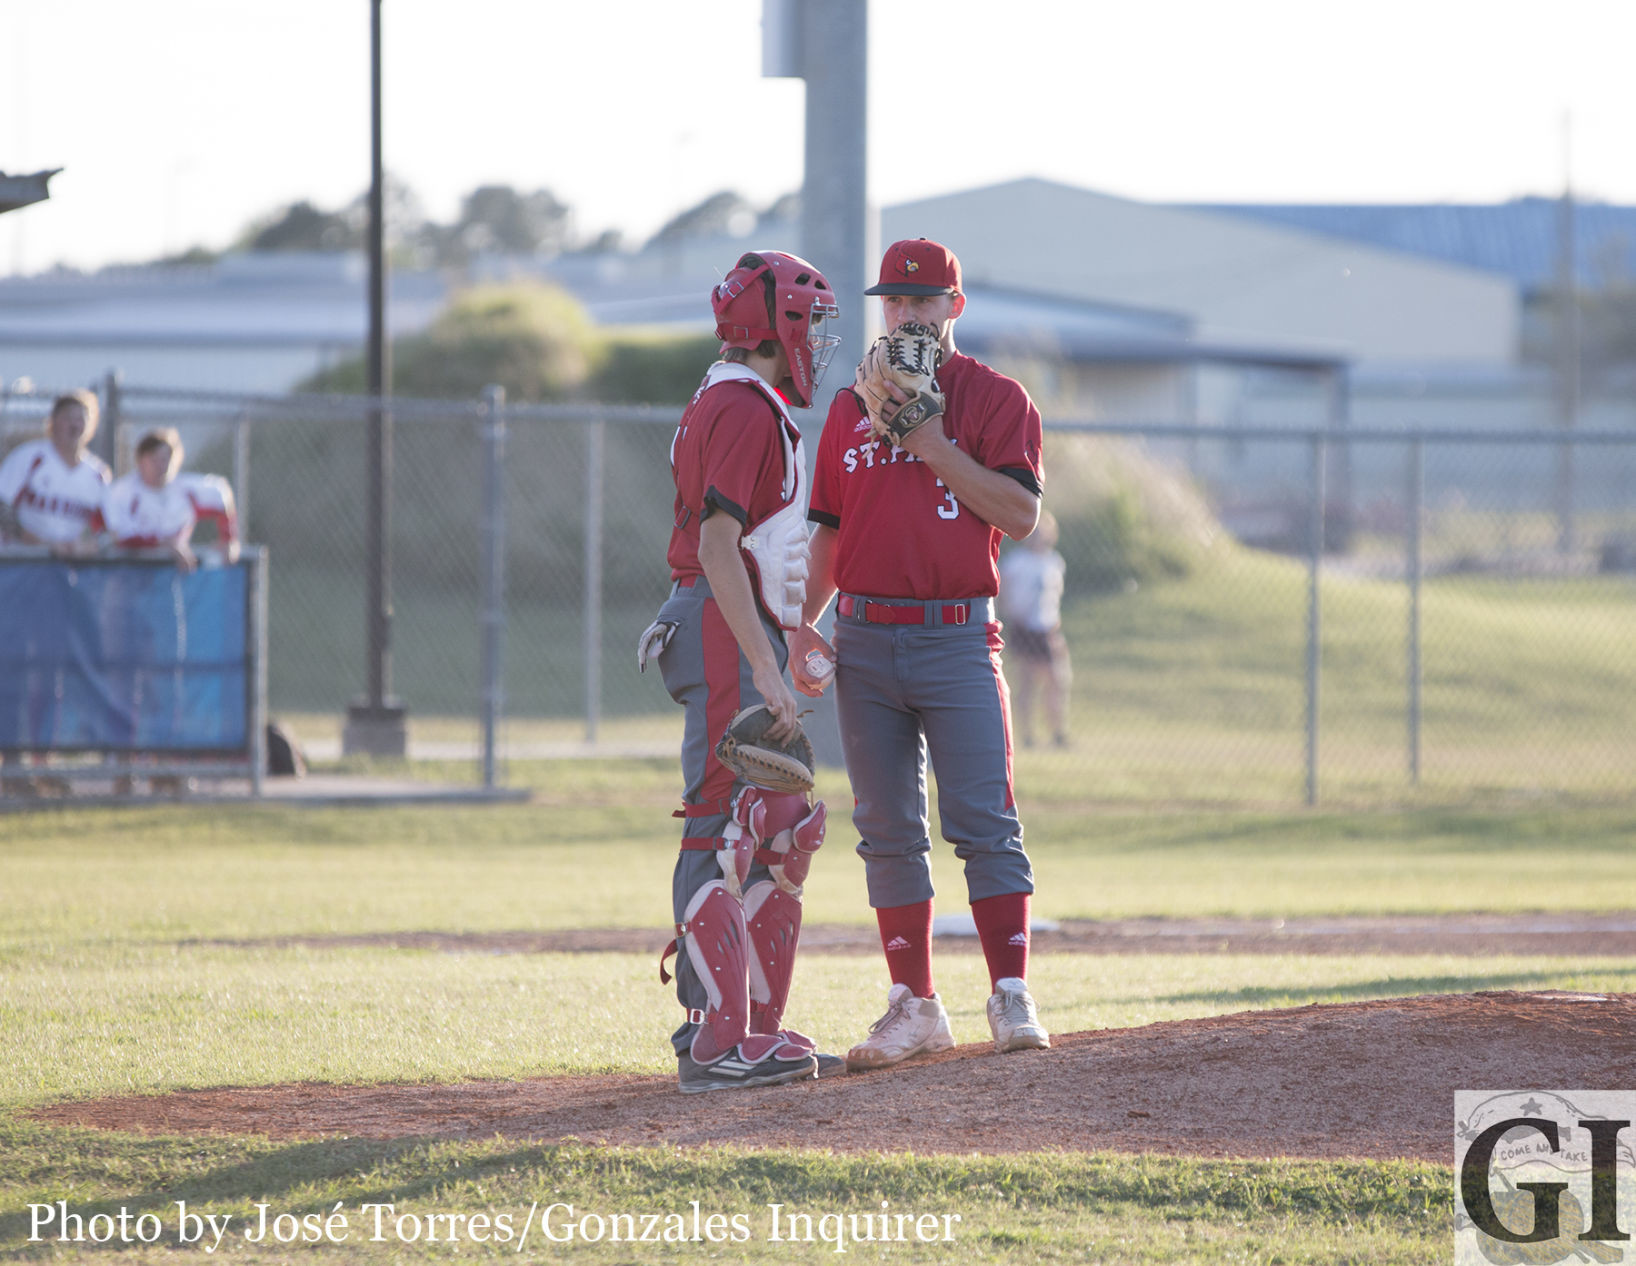 Conor Kresta meets with his catcher in the Cardinals’ 5-0 loss.